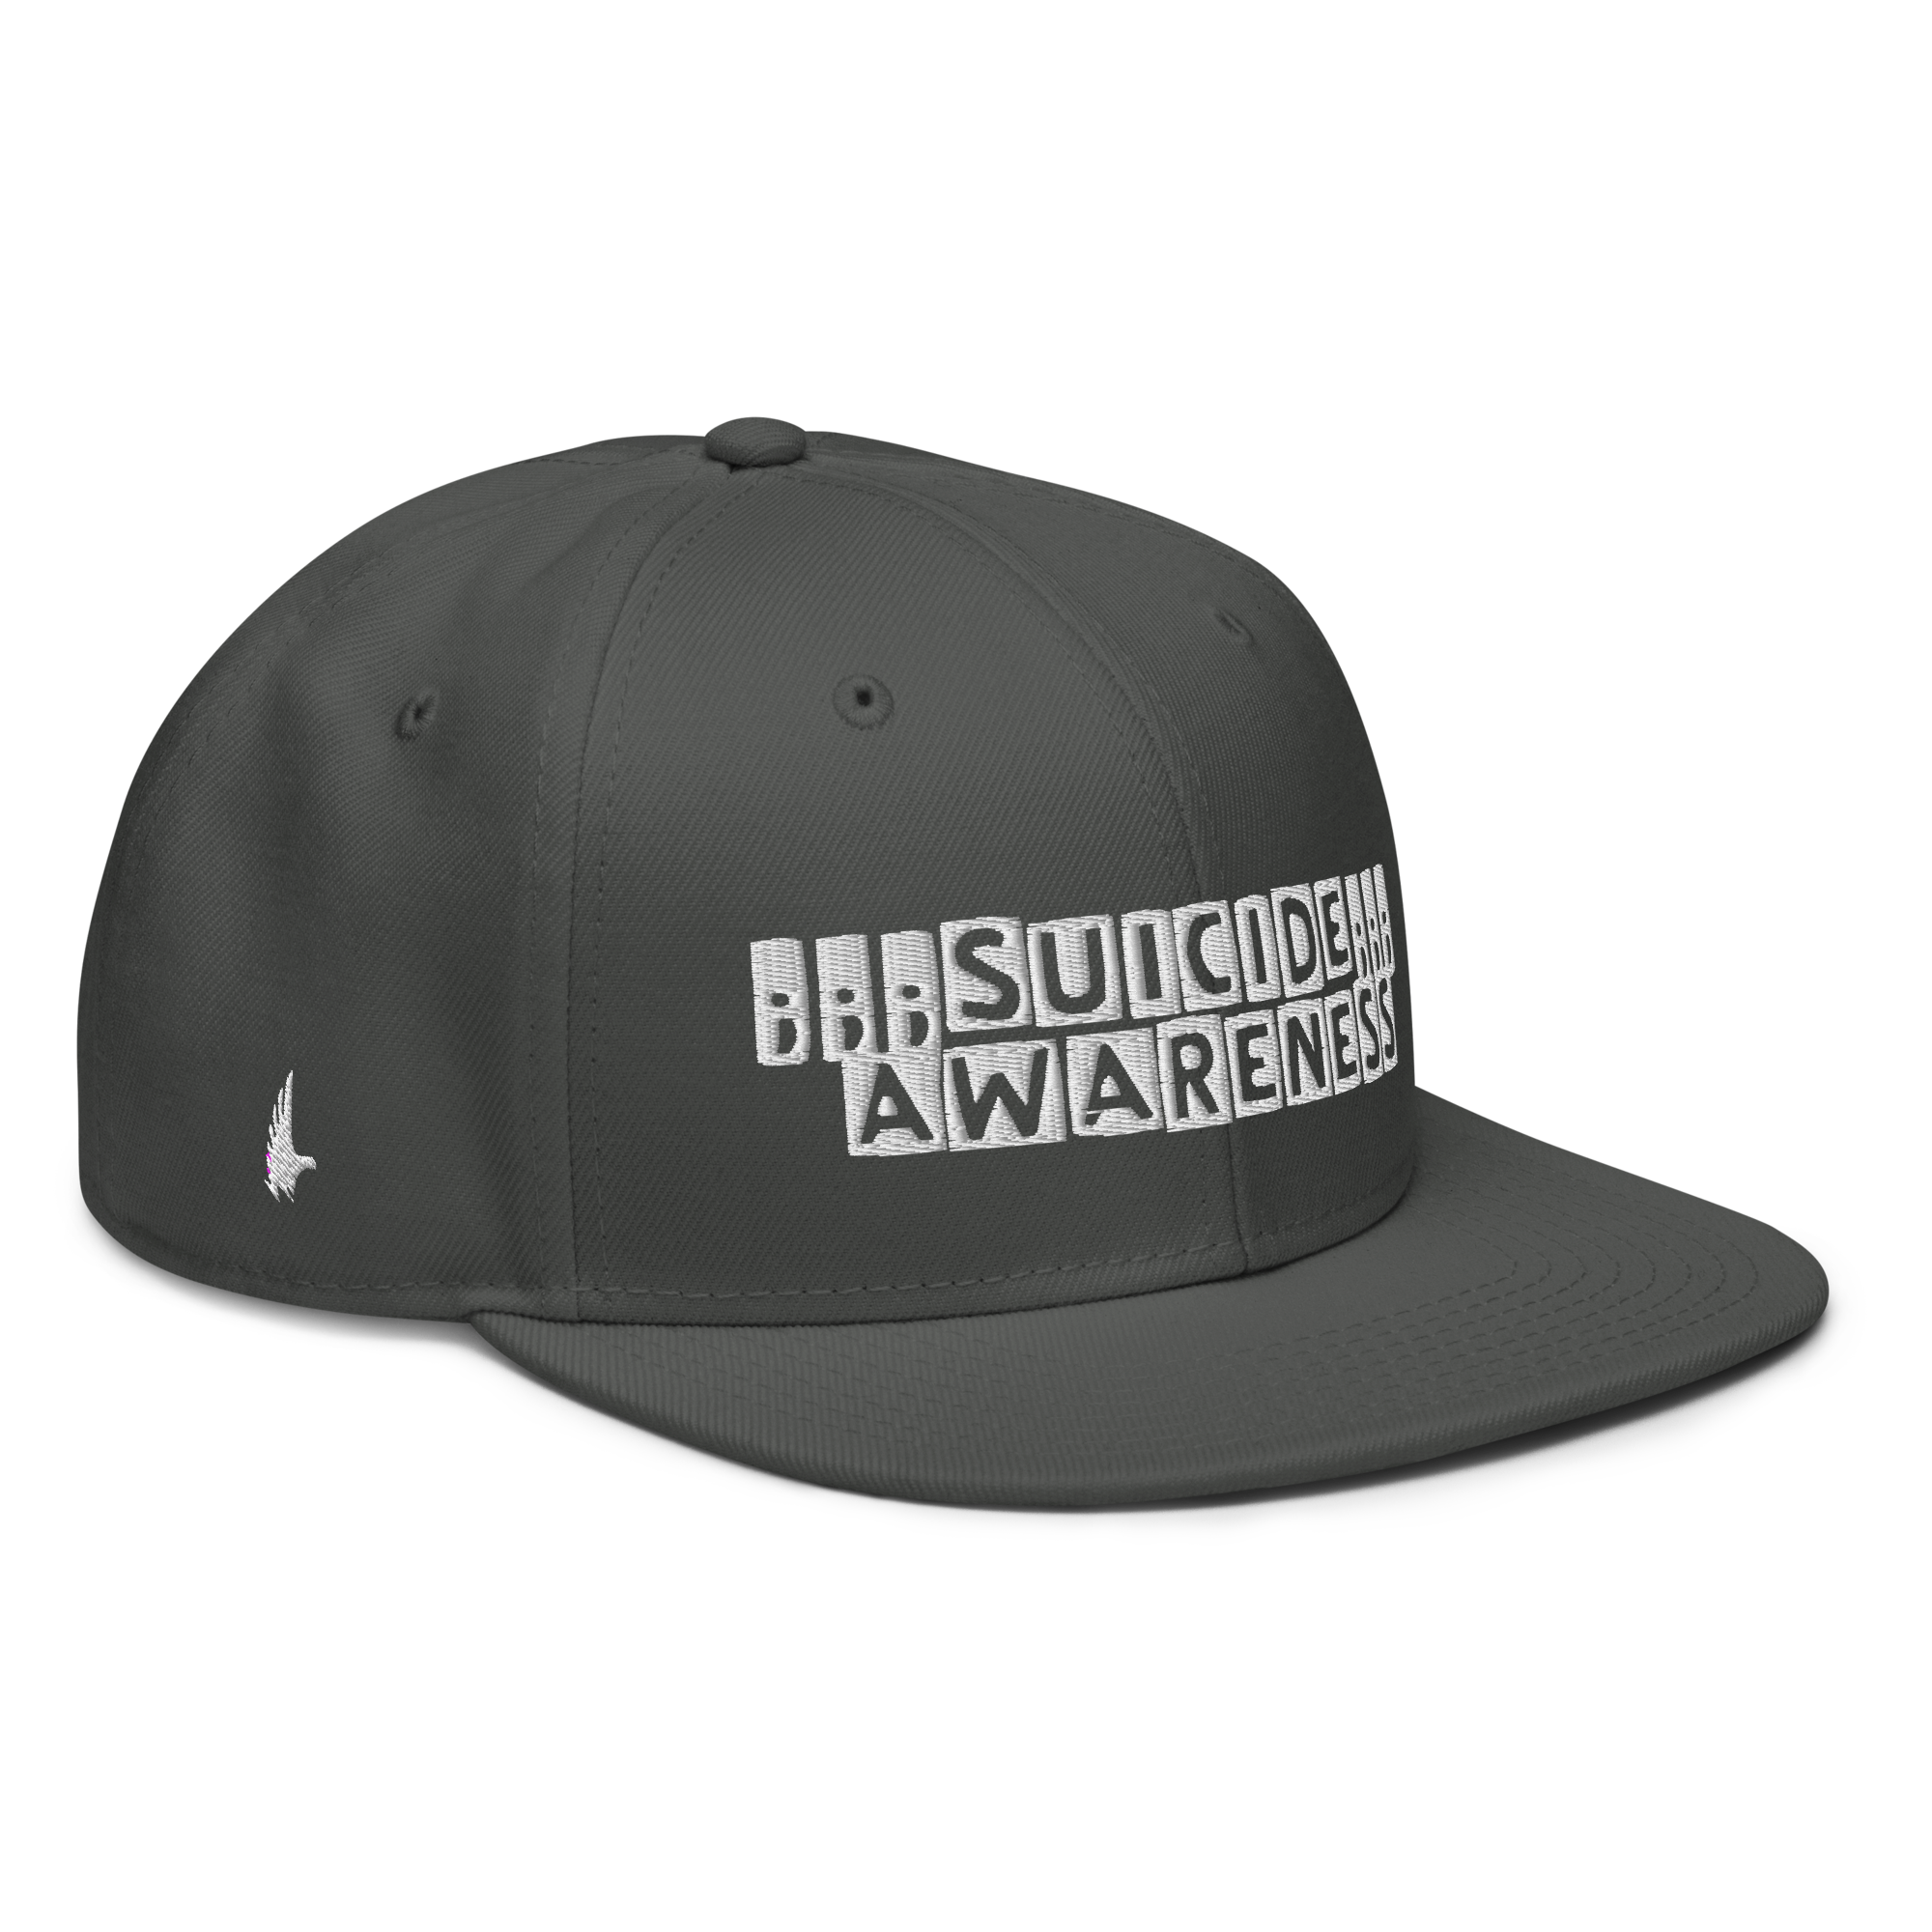 Suicide Awareness Snapback Hat - Chacrcoal Grey OS - Loyalty Vibes